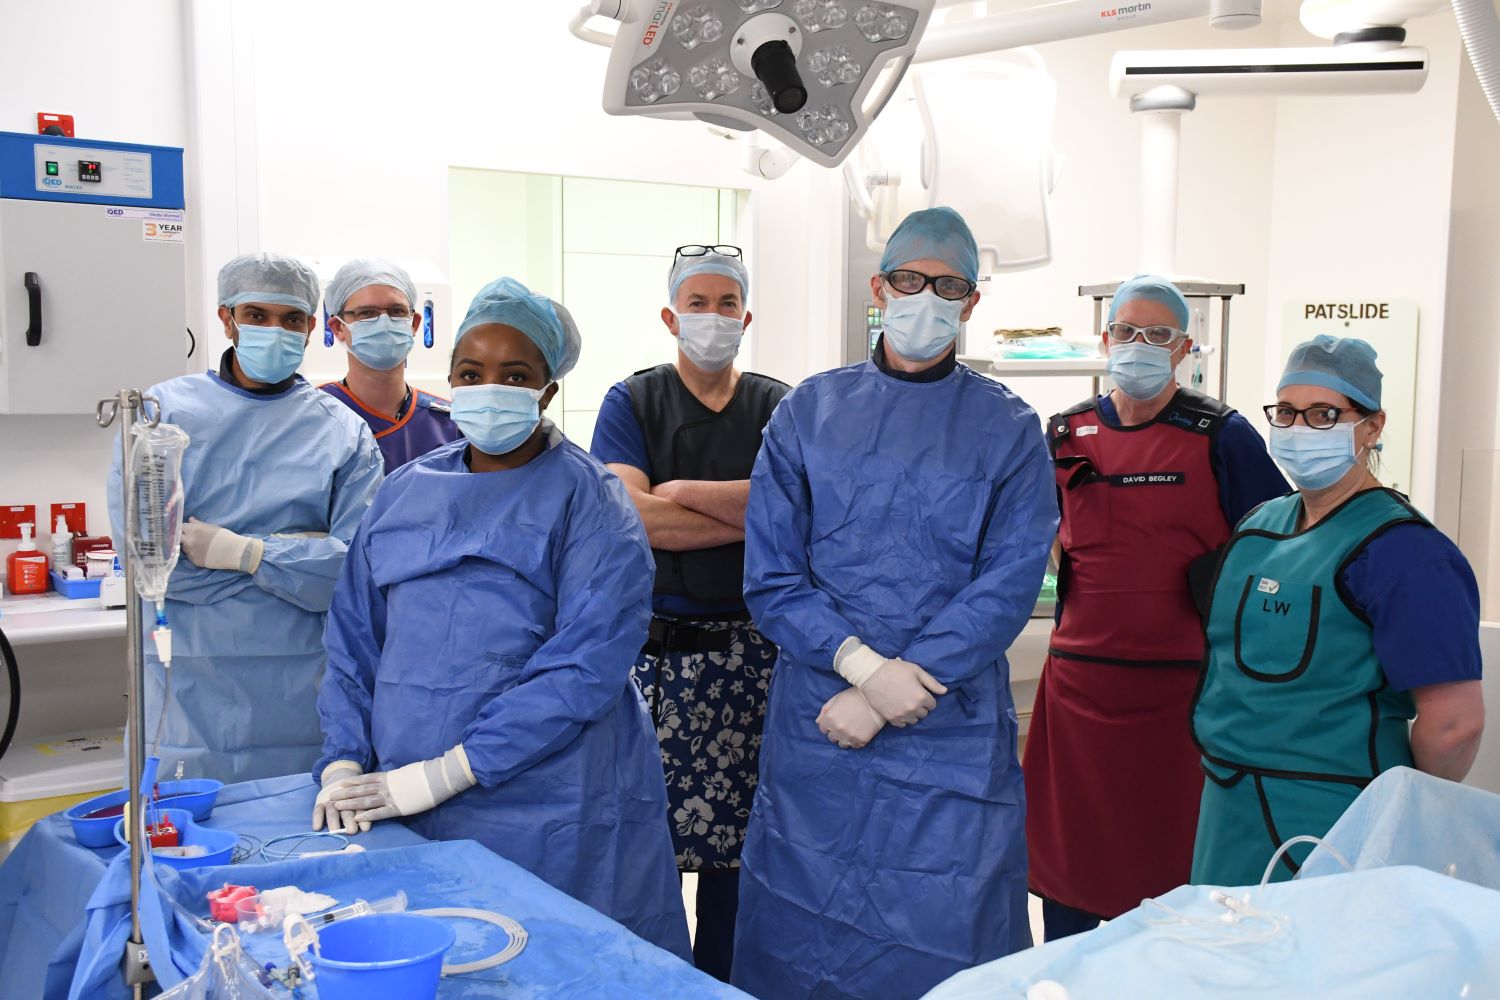 Seven people dressed in theatre scrubs and face masks